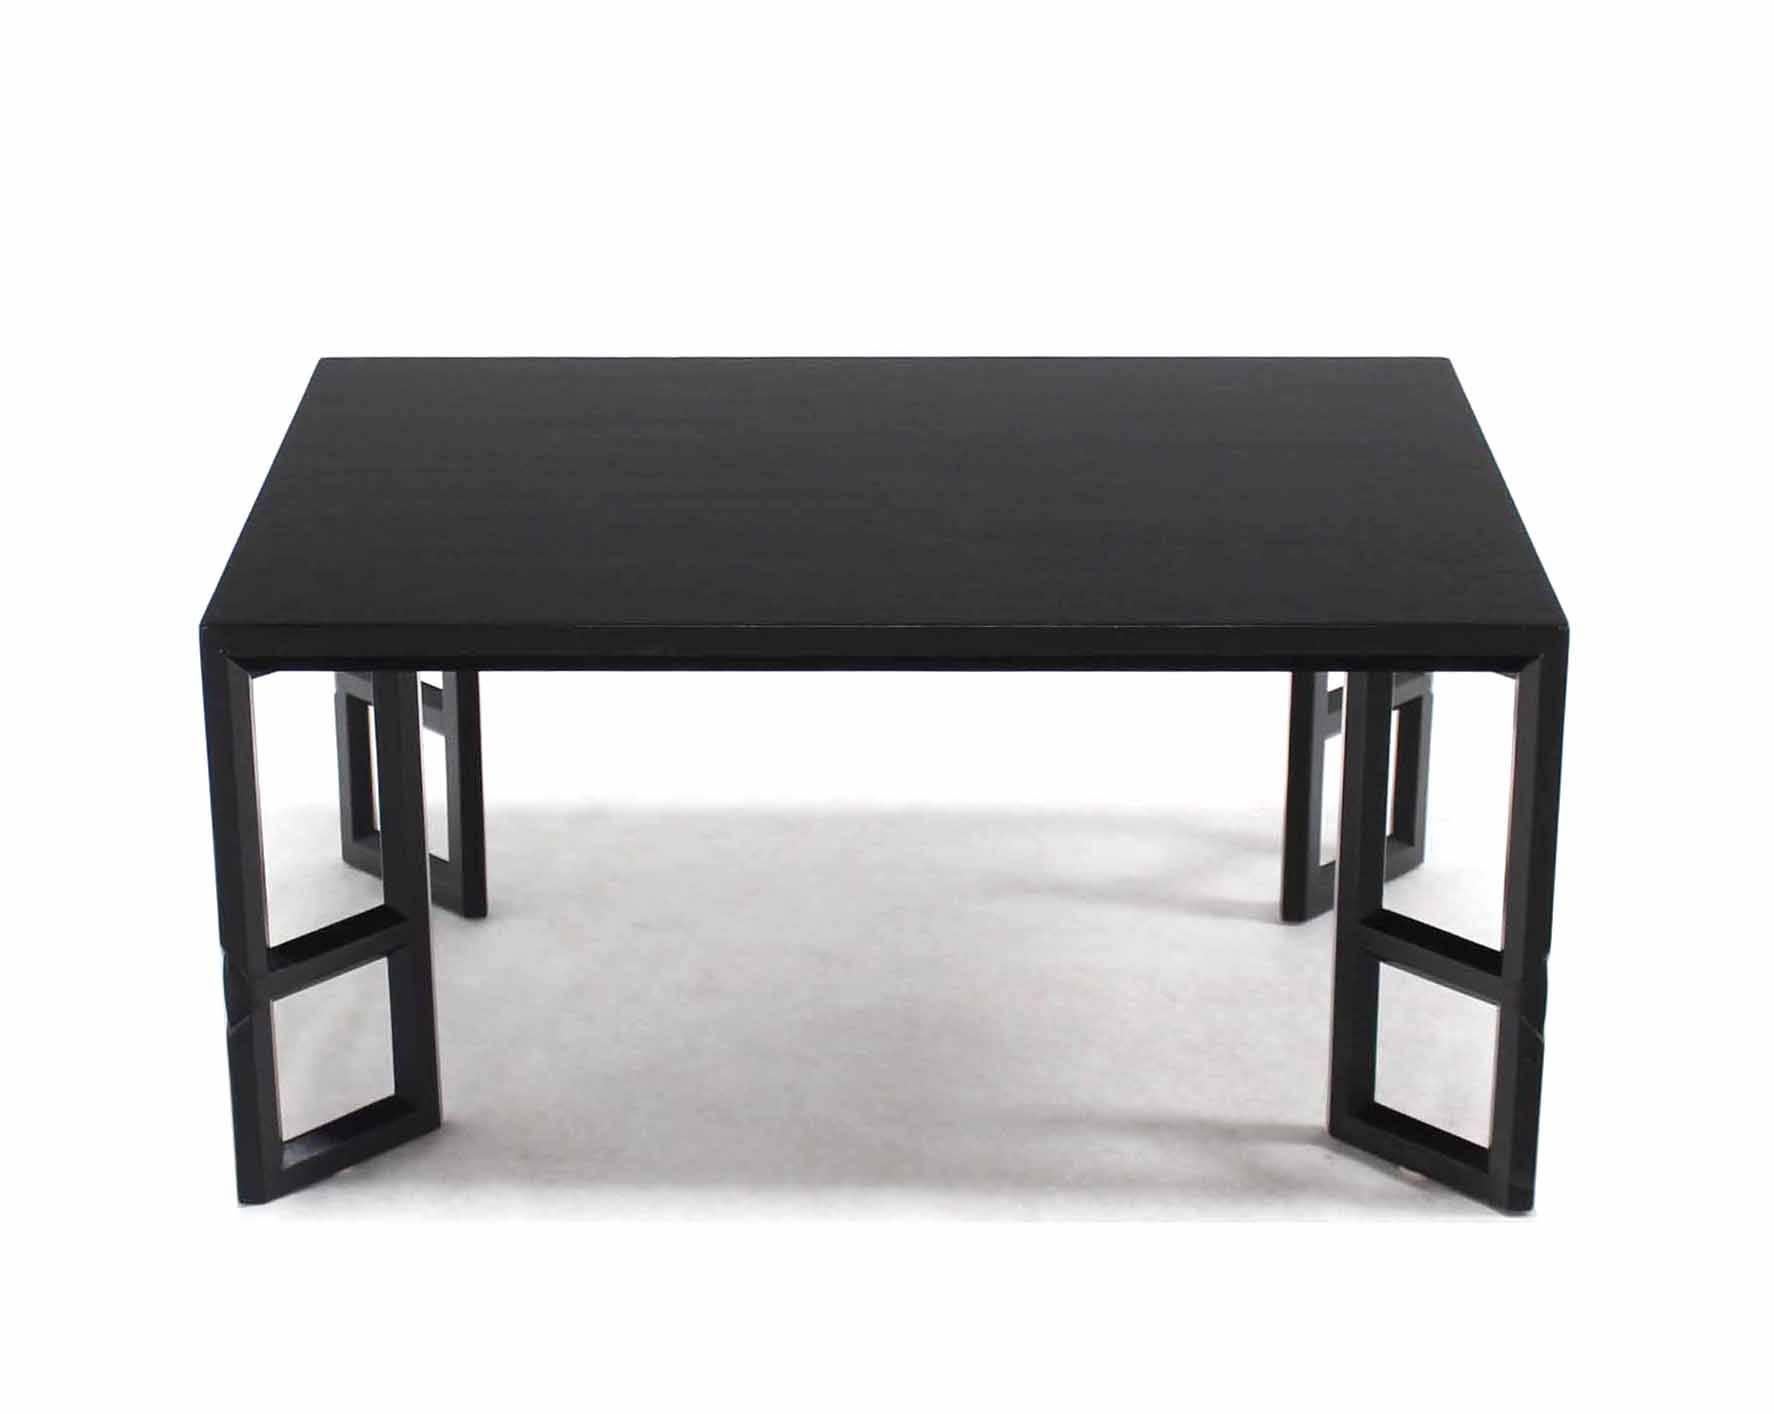 Very nice craftsmanship Mid-Century Modern "frame" leg black lacquer coffee table. The frame leg has small Art Nouveau style carving. 